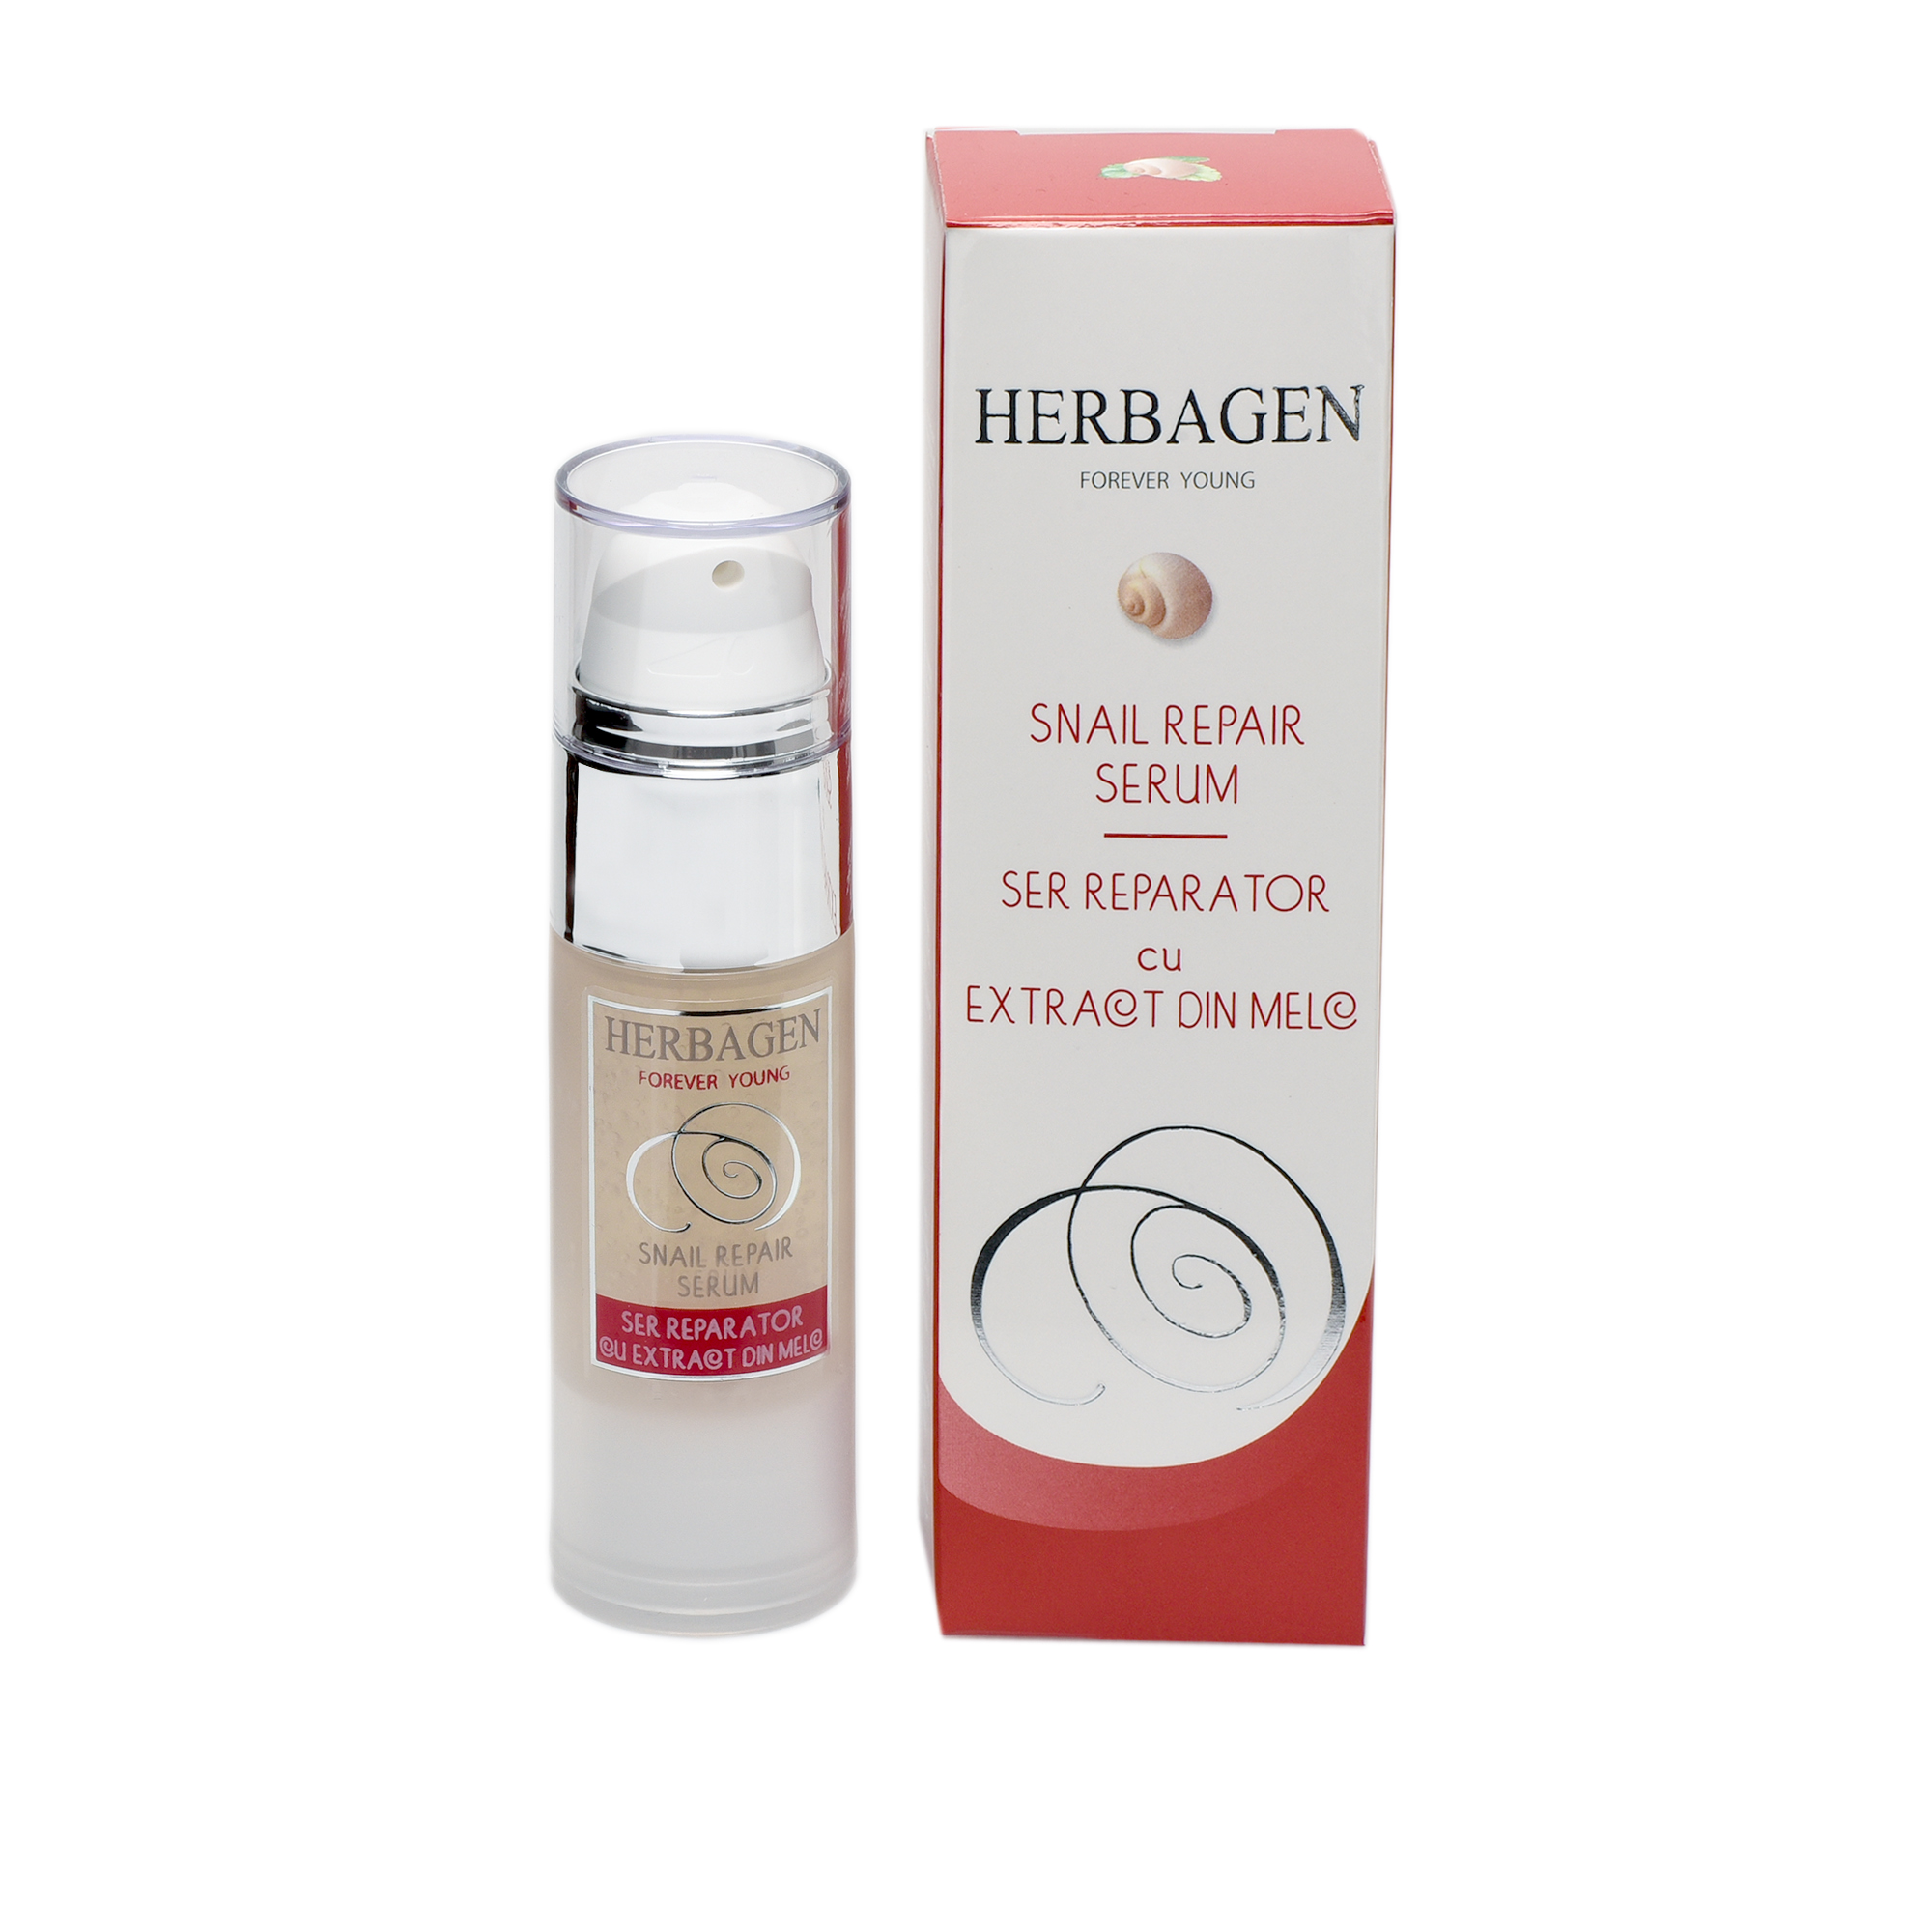 Herbagen Crema cu Extract din Melc | Produse medicale